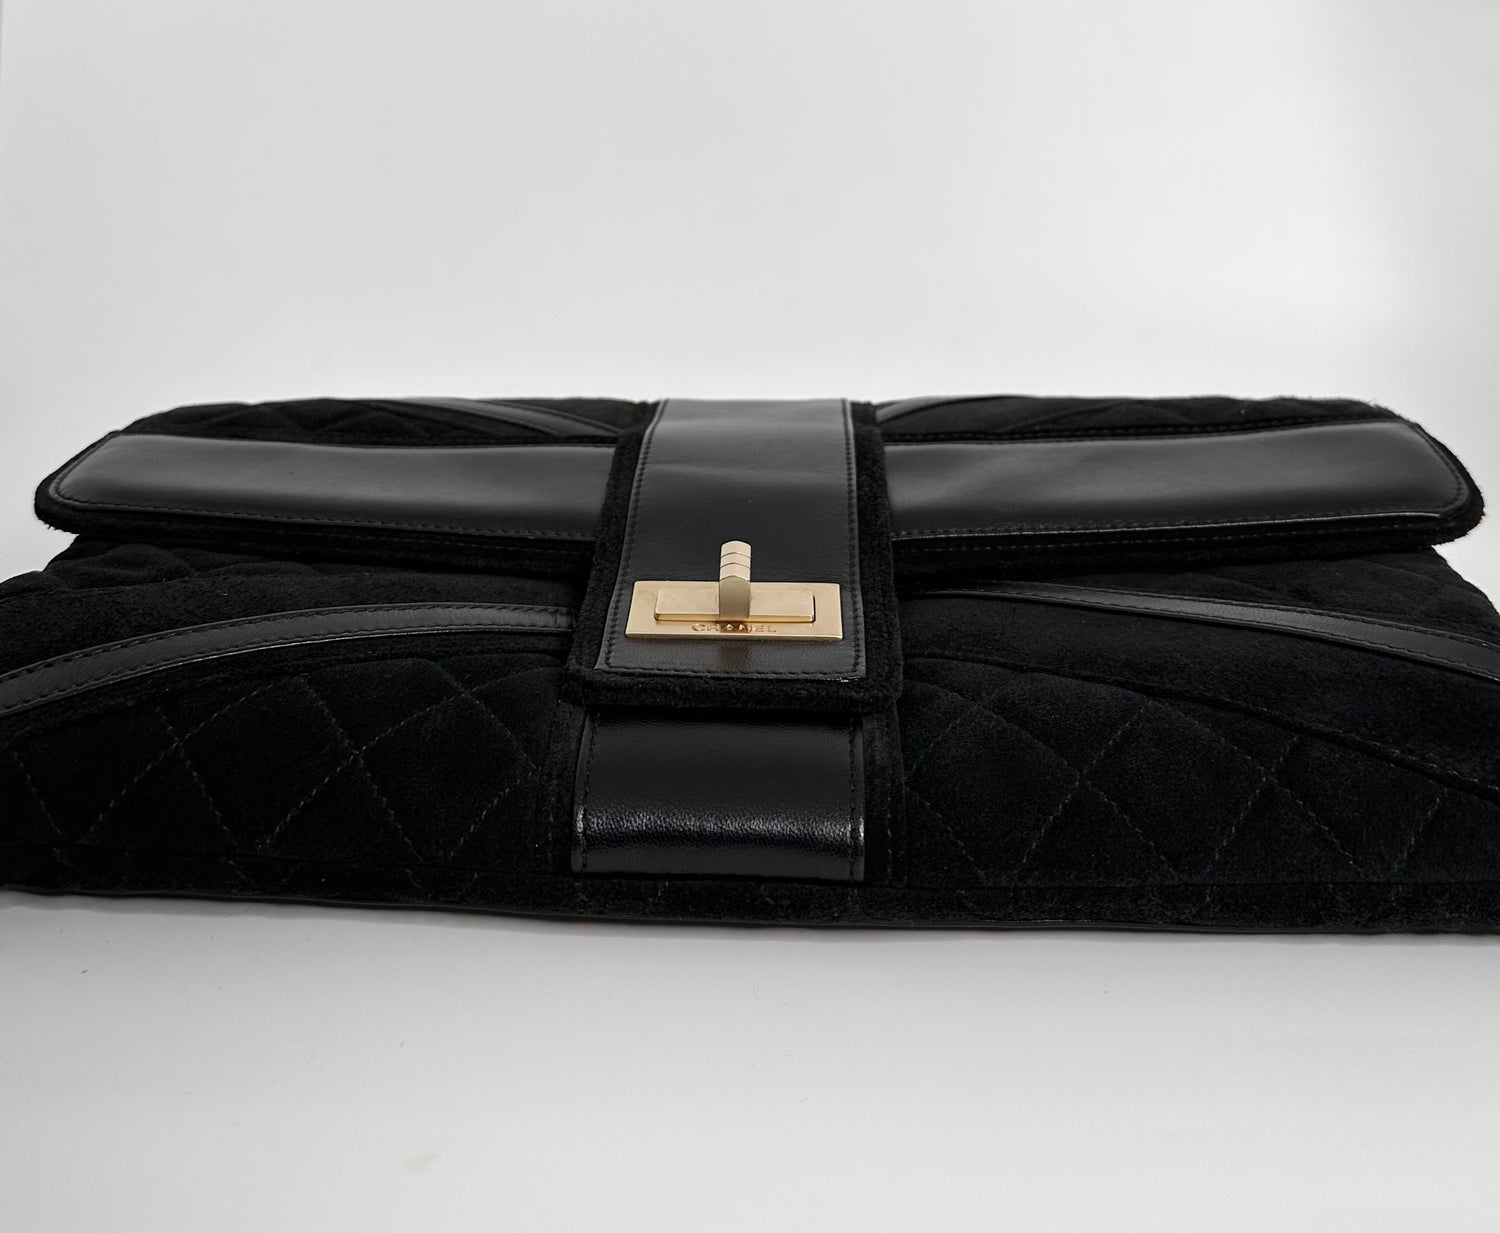 CHANEL Pre-Owned Classic Flap Shoulder Bag - Farfetch